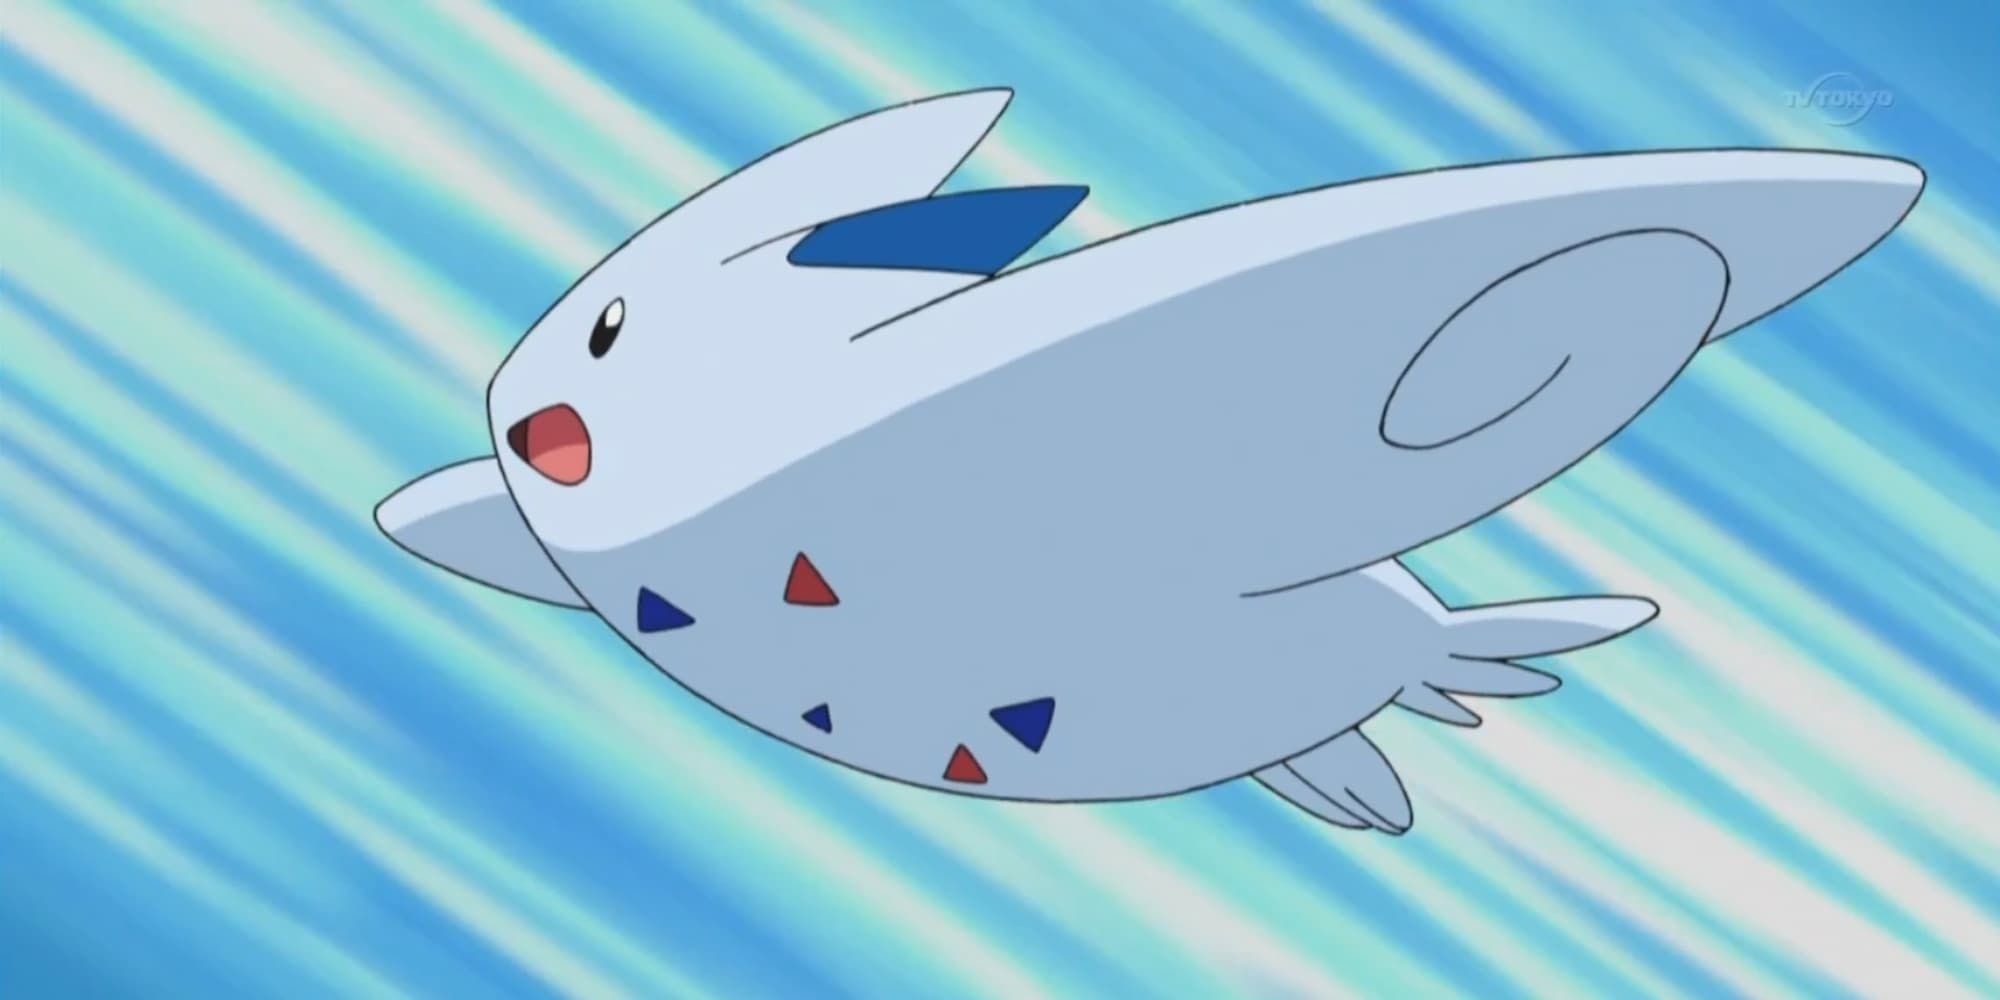 Togekiss flying in the air